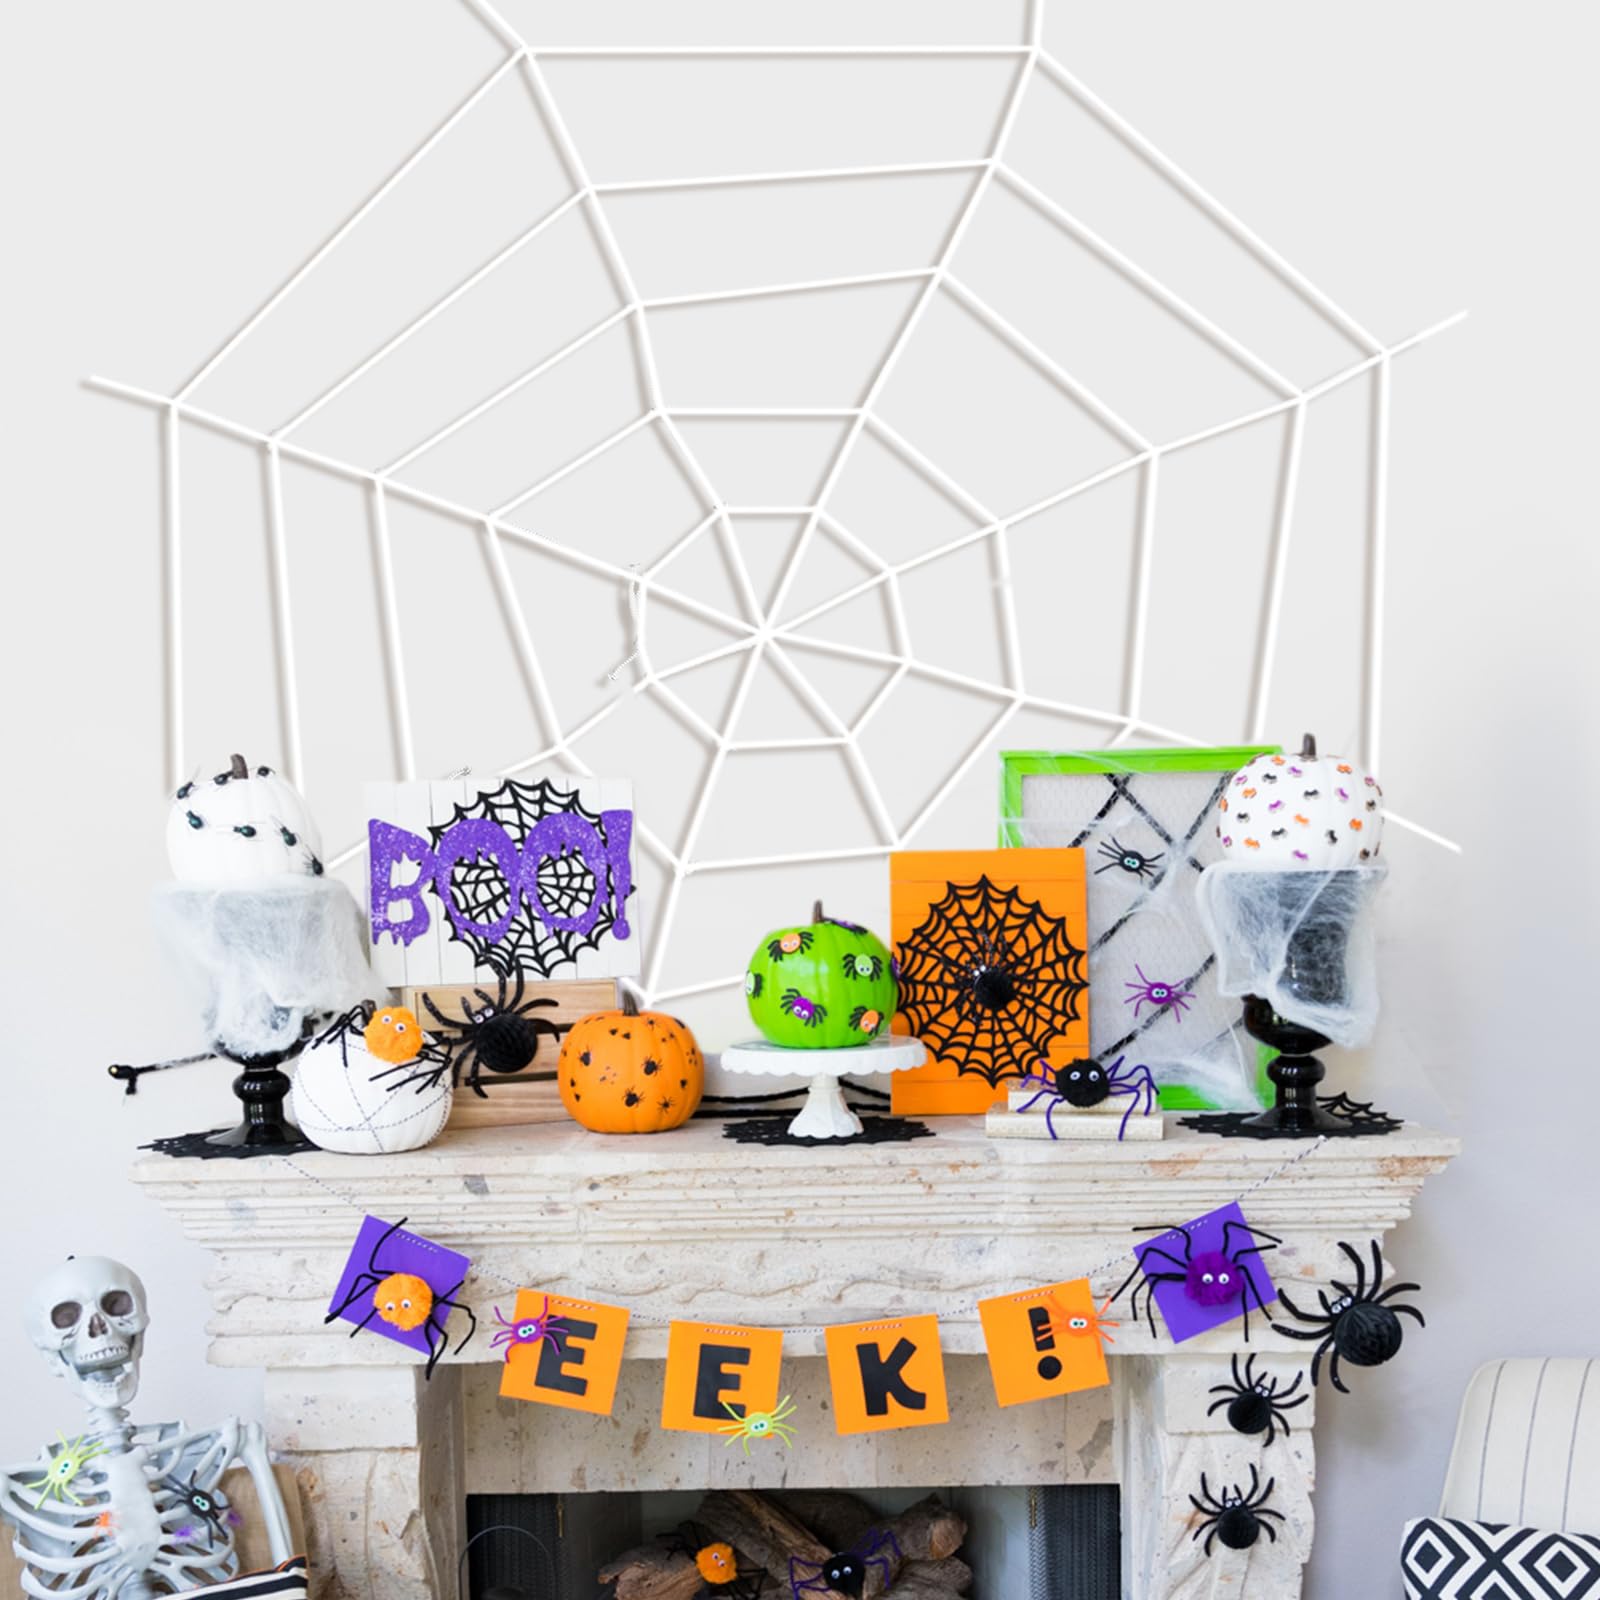 3 FT Halloween Giant String Rope Spider Web Decorations - Round Fake Spider Elastic Belt Props for Window Indoor Outdoor Yard Porch Haunted House Decor